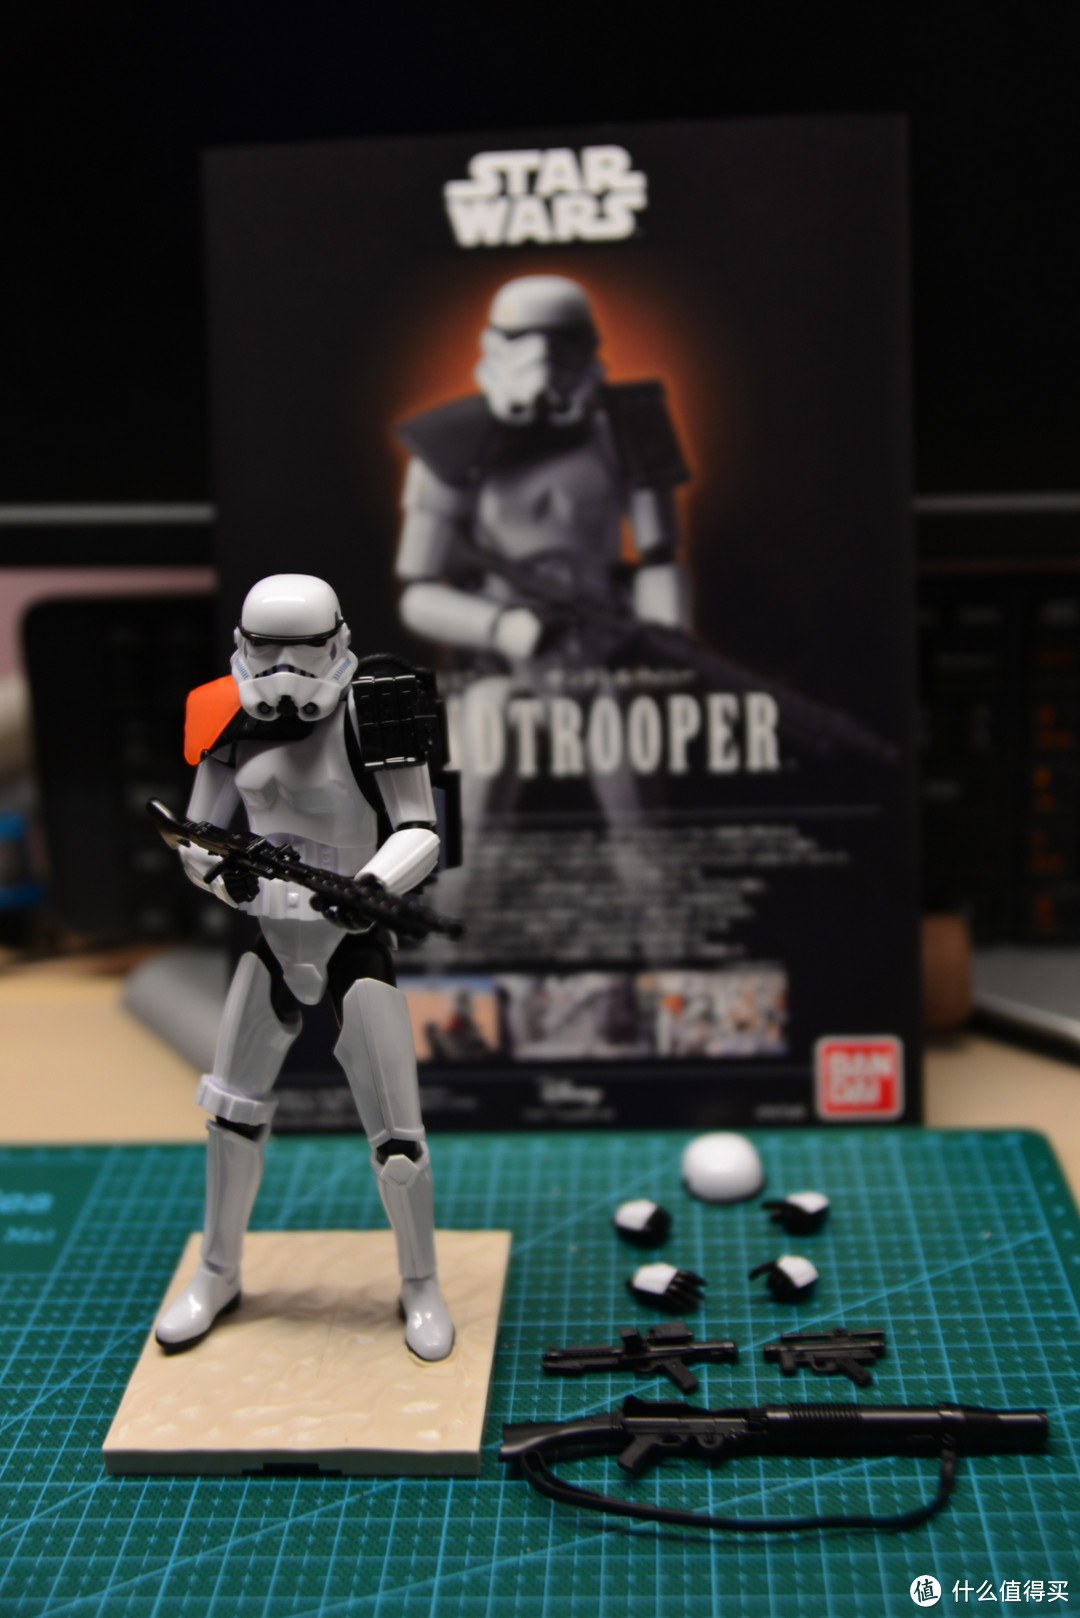 May The Force Be With You，BANDAI 万代 STORM ROOPER 1/12 暴风兵 开箱